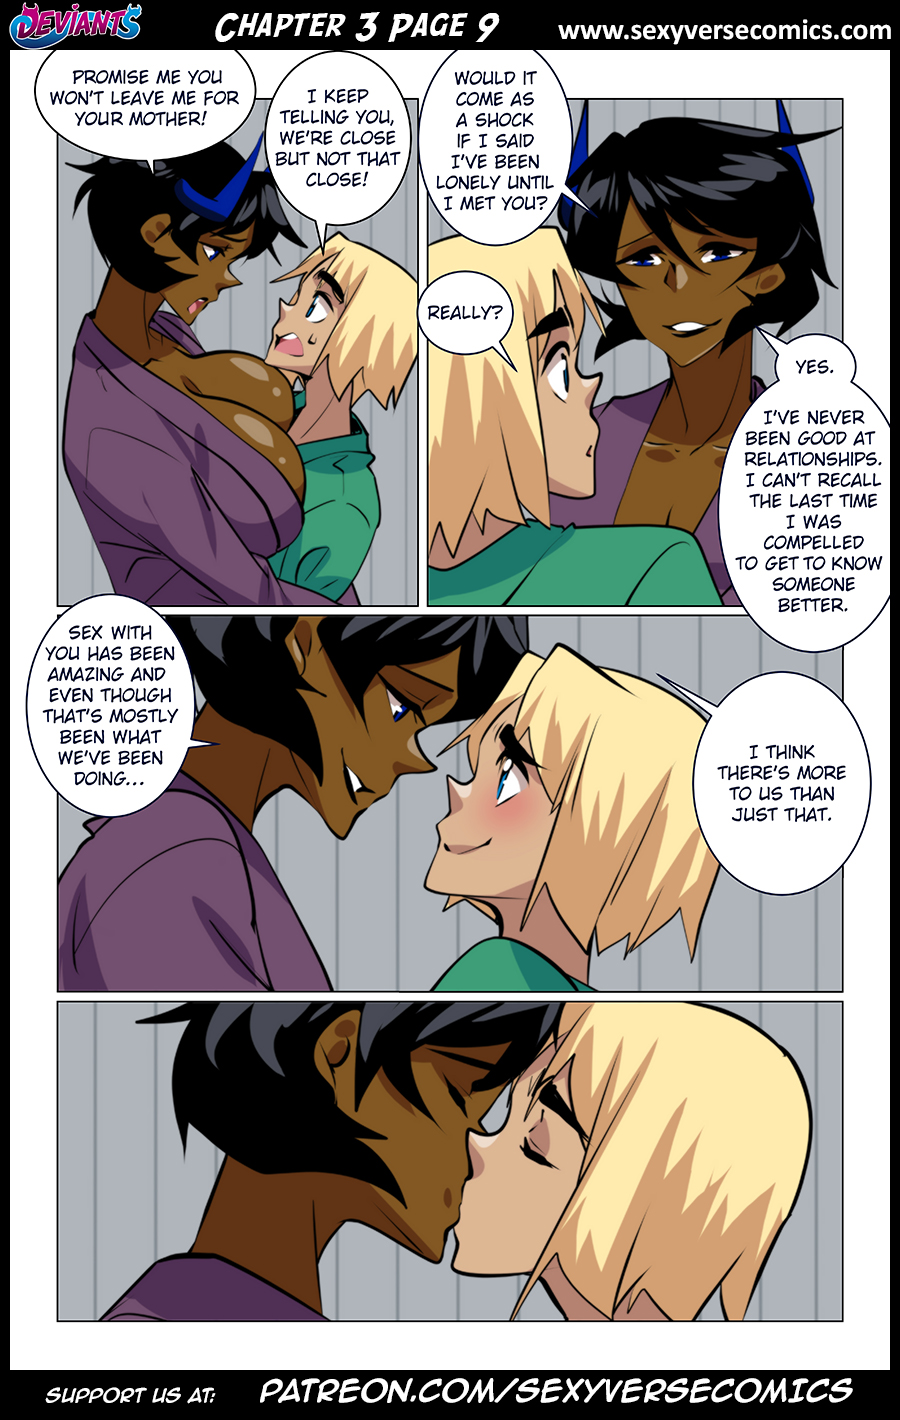 Deviants Chapter 3 Page 9